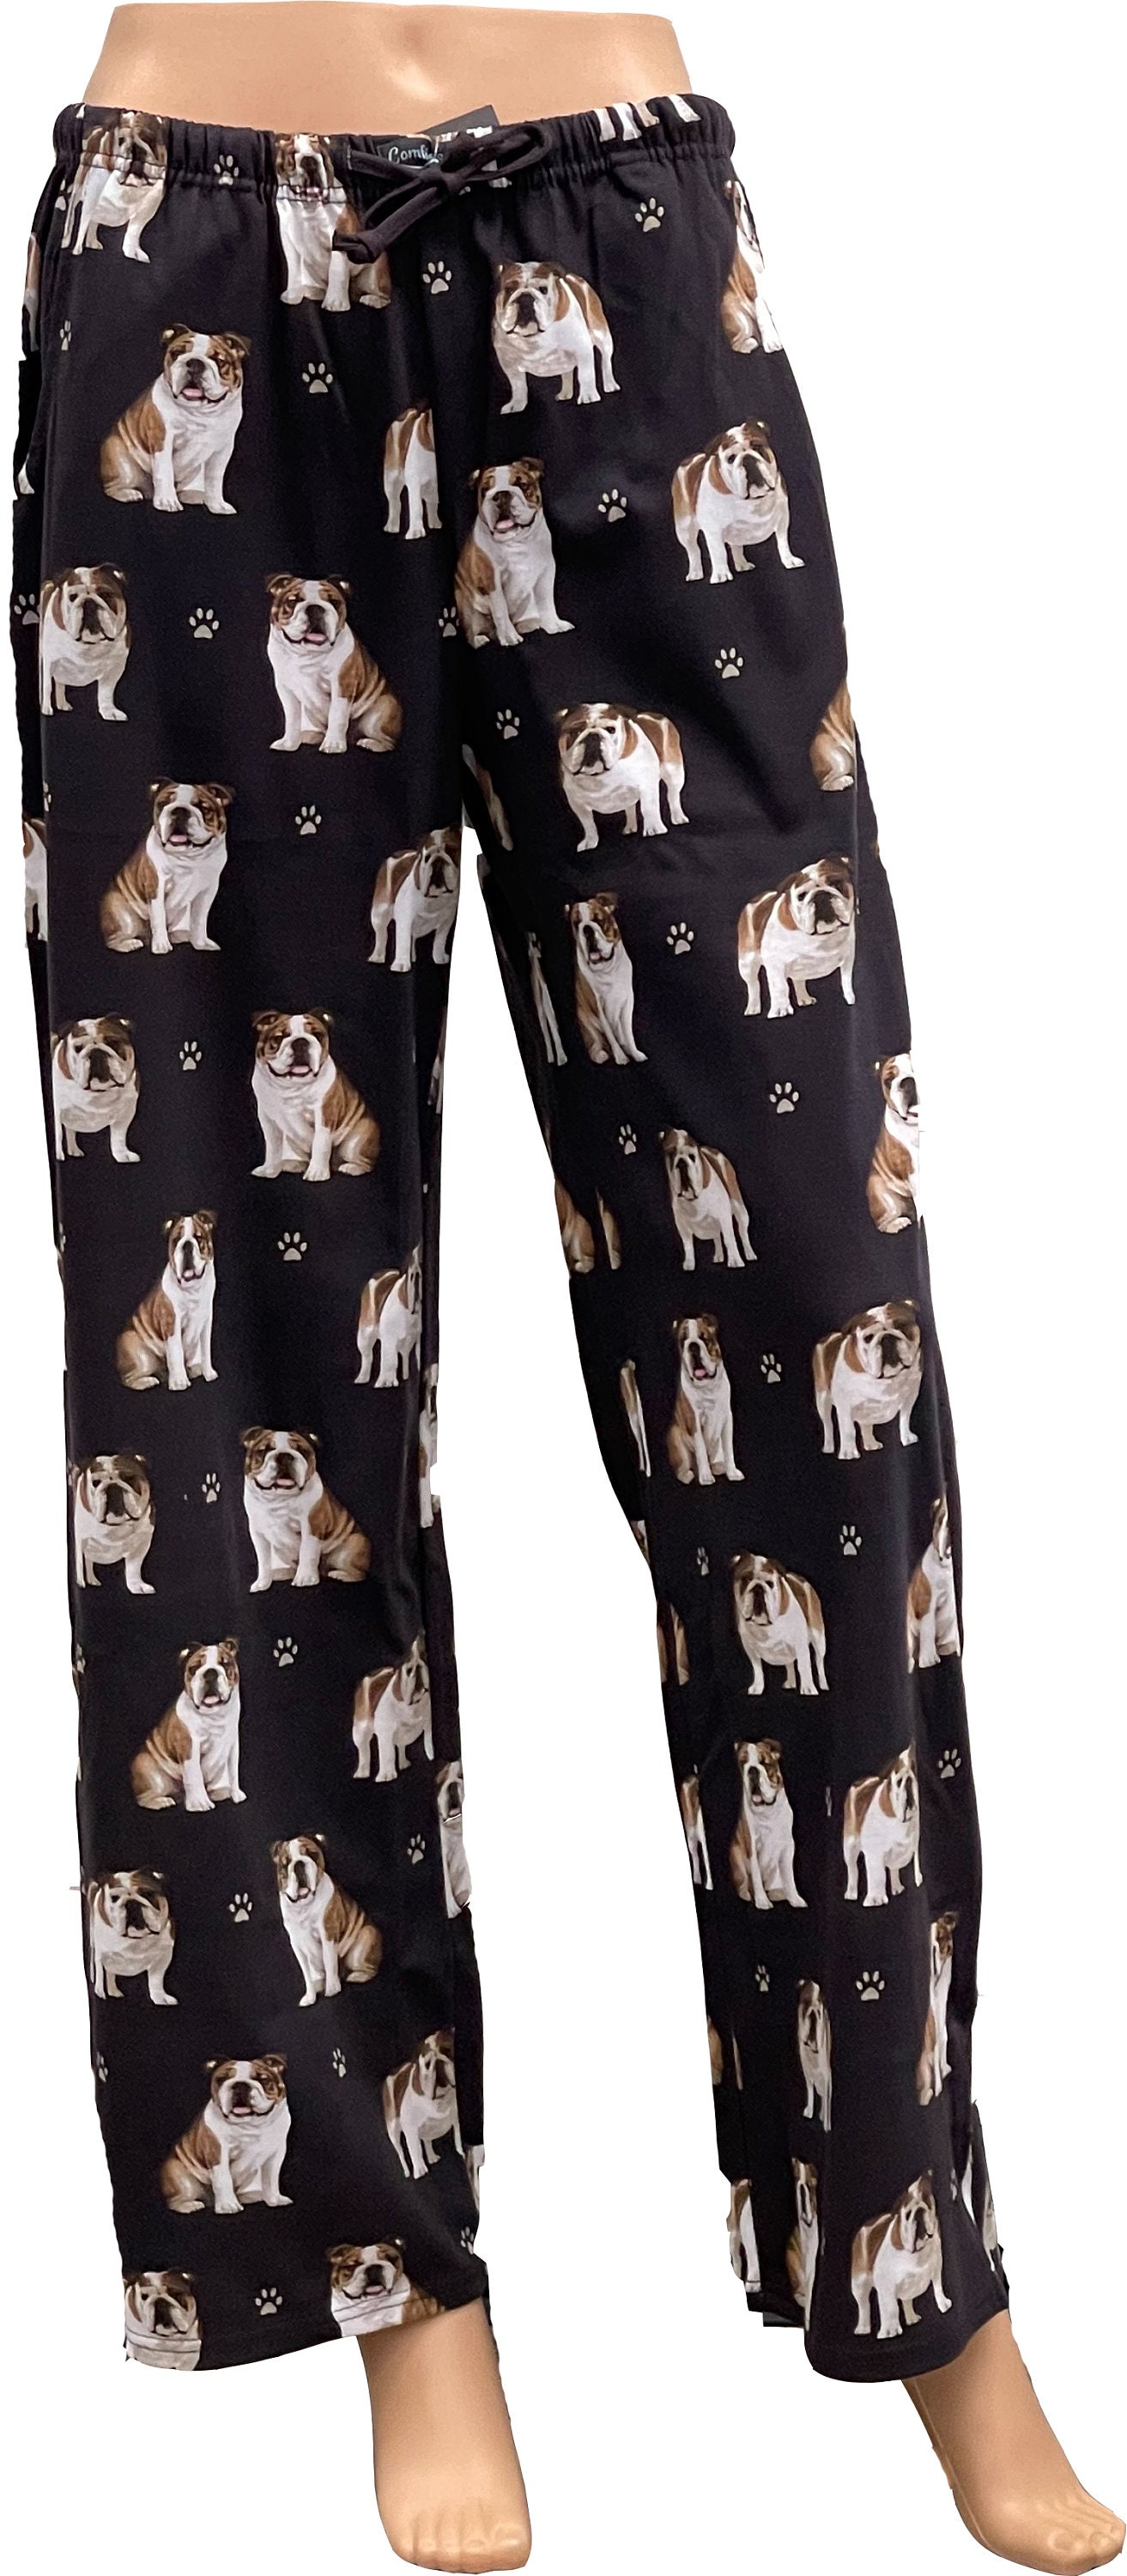 Bulldog Unisex Cotton Blend Pajama Bottoms - Super Soft & Comfortable Perfect For Gifts